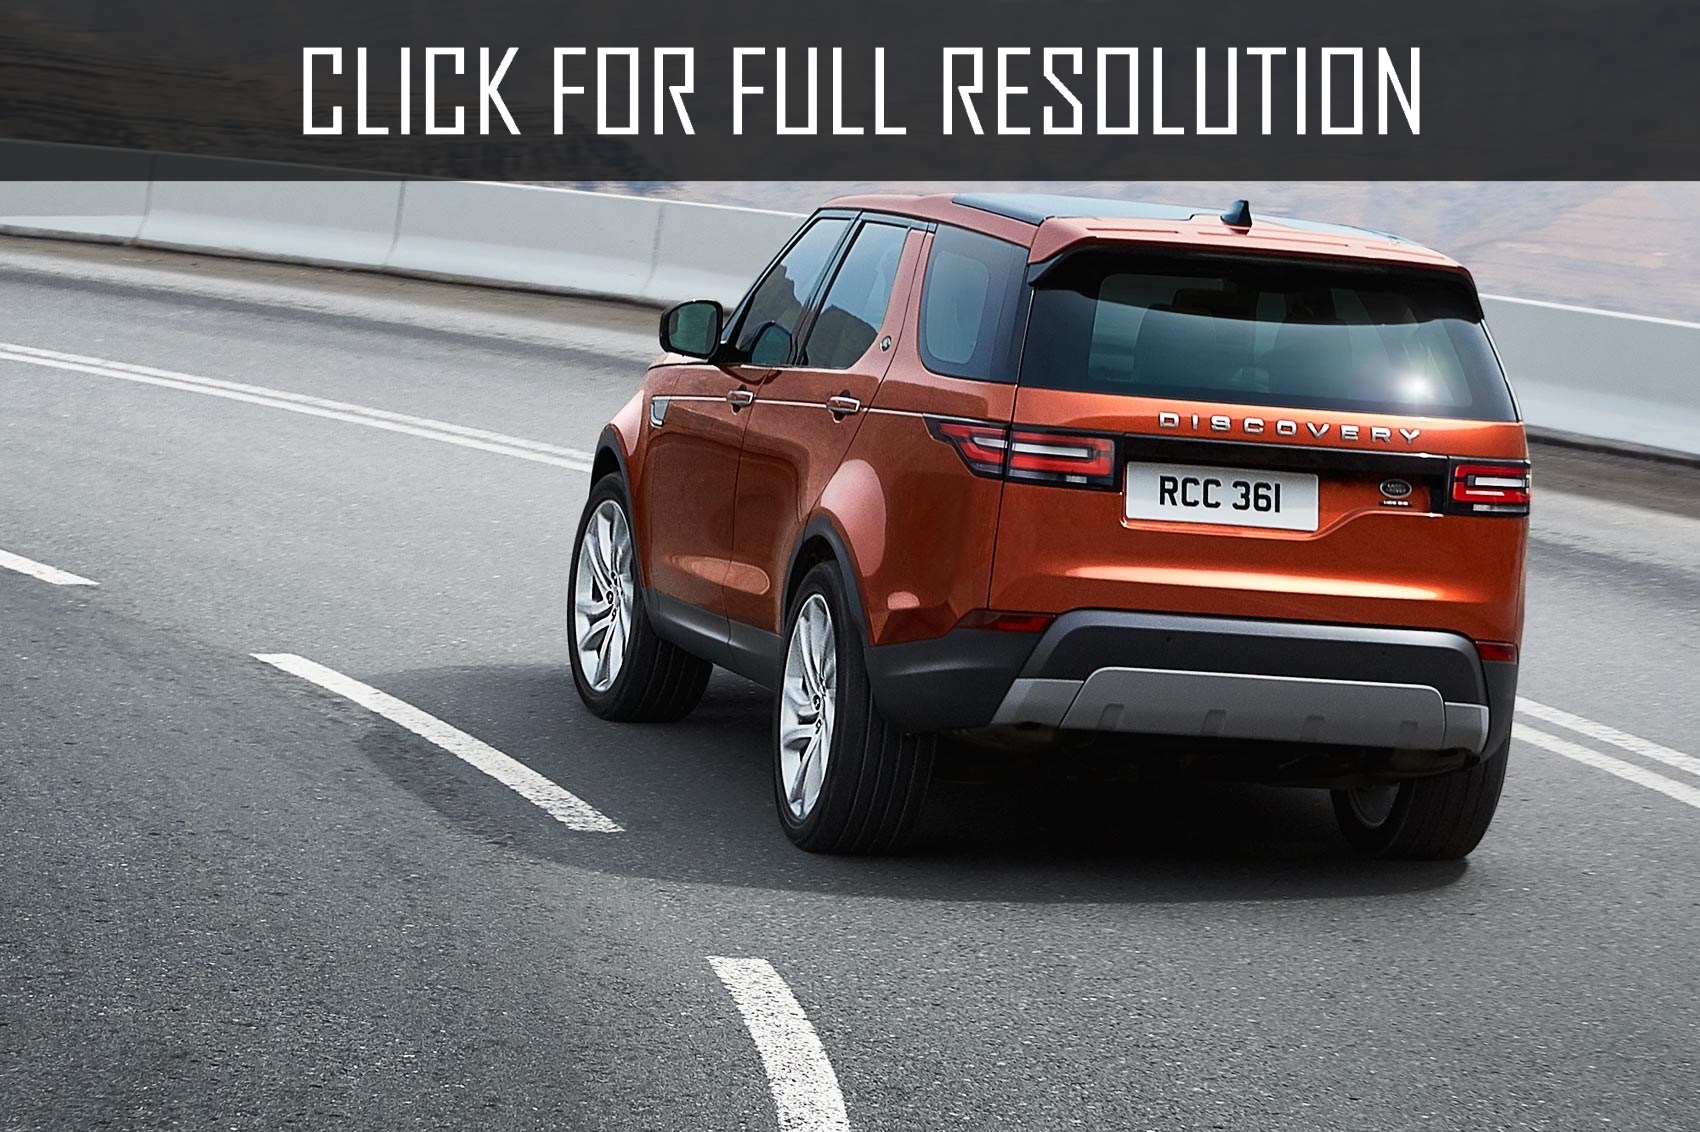 2017 Land Rover Discovery 5 news, reviews, msrp, ratings